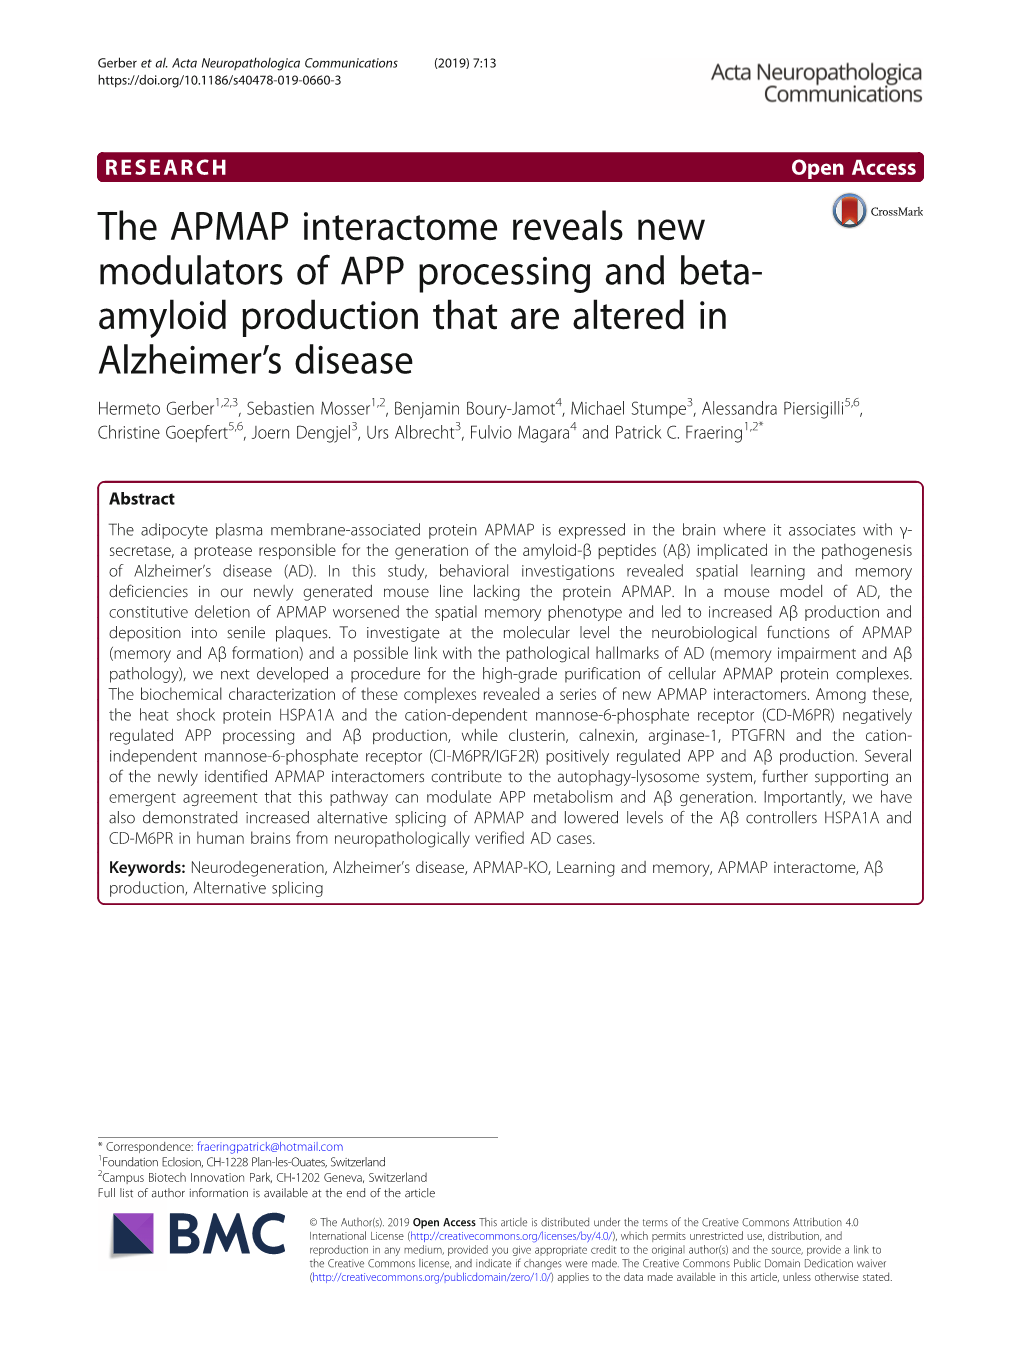 The APMAP Interactome Reveals New Modulators of APP Processing And